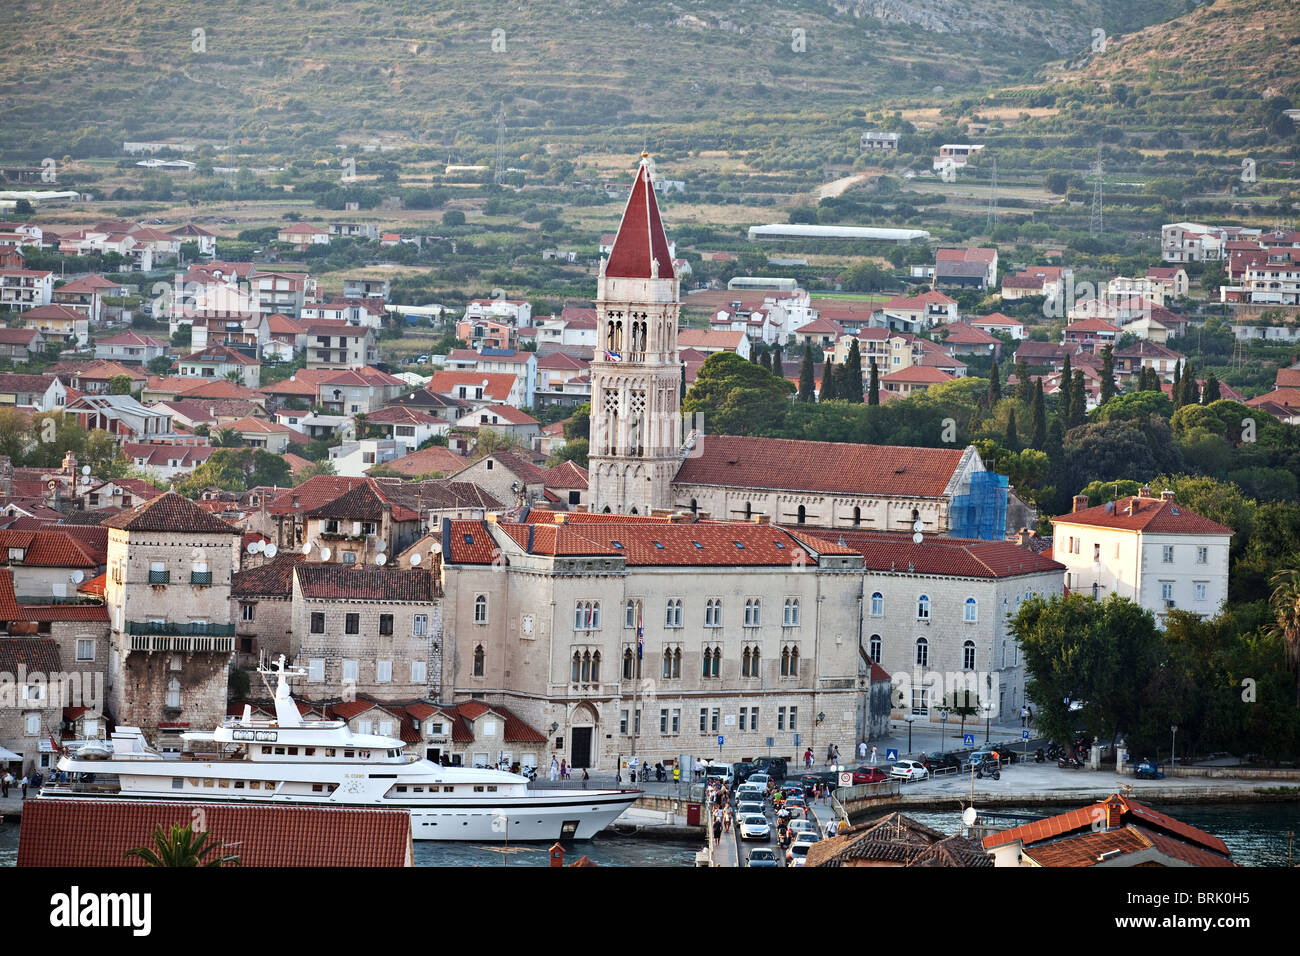 Old town of Trogir Cathedral of St. Lawrence in the middle, Dalmatian coast, Croatia Stock Photo